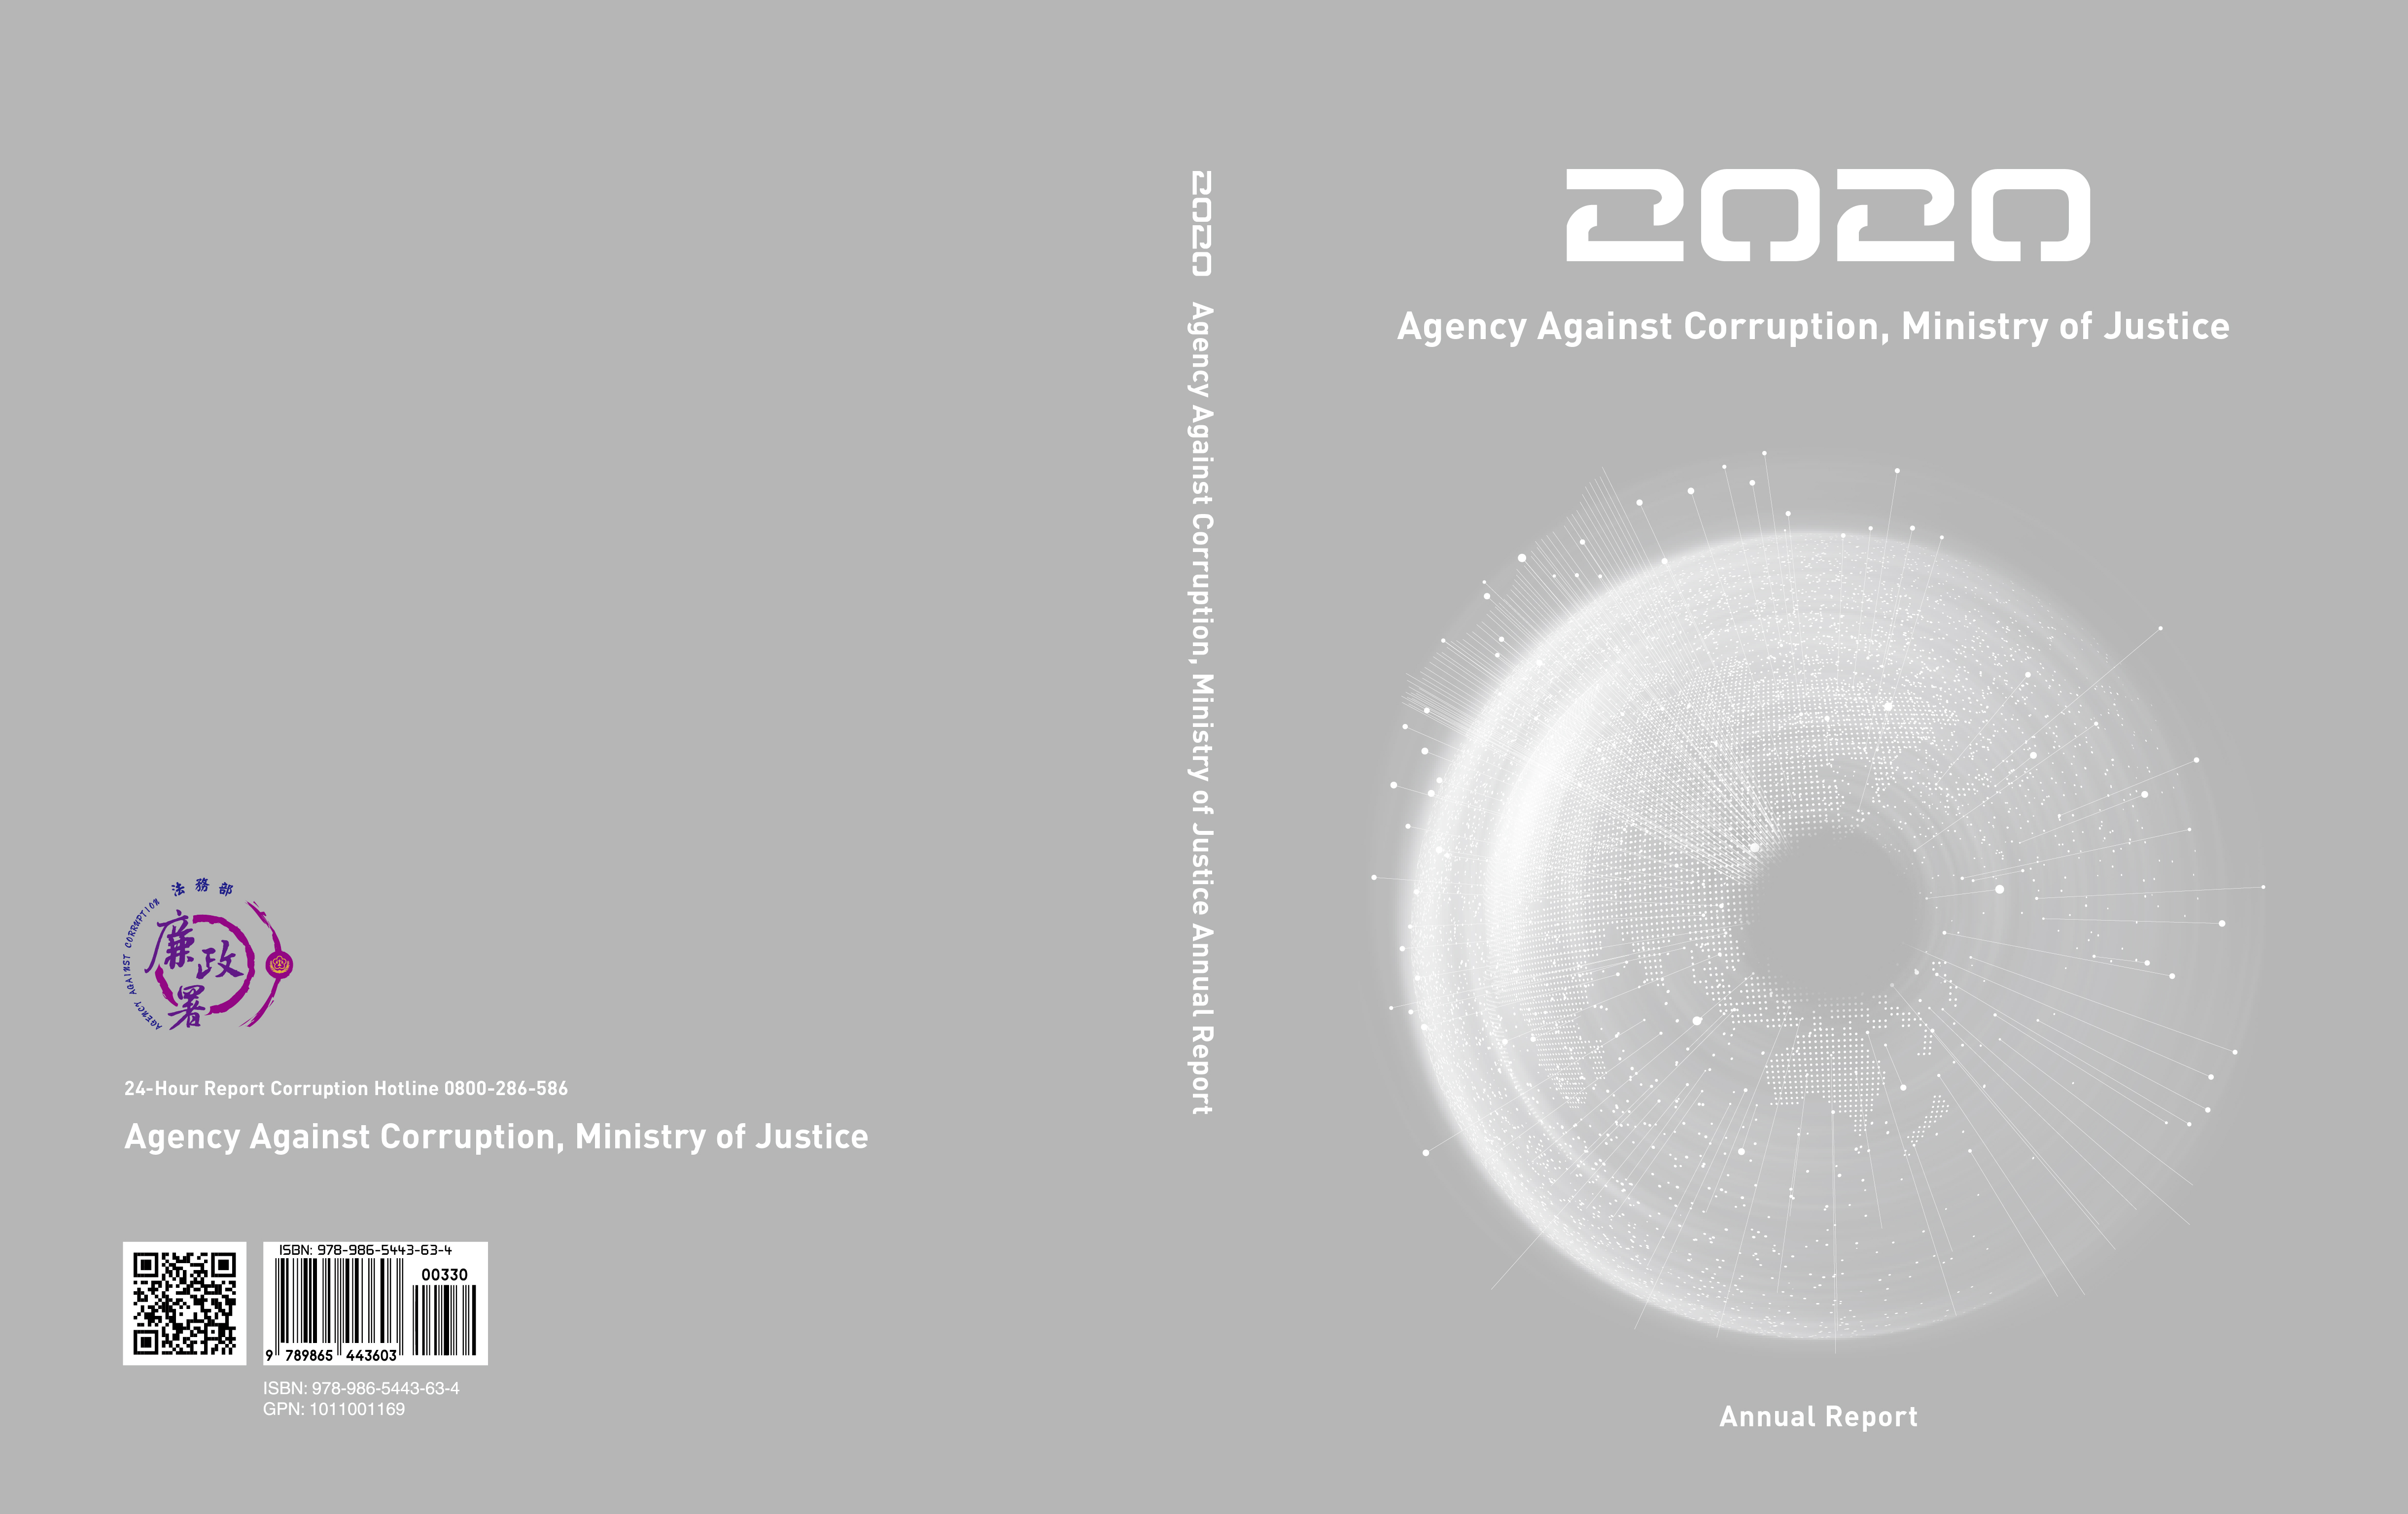 Agency Against Corruption, Ministry of Justice 2020 Annual Report